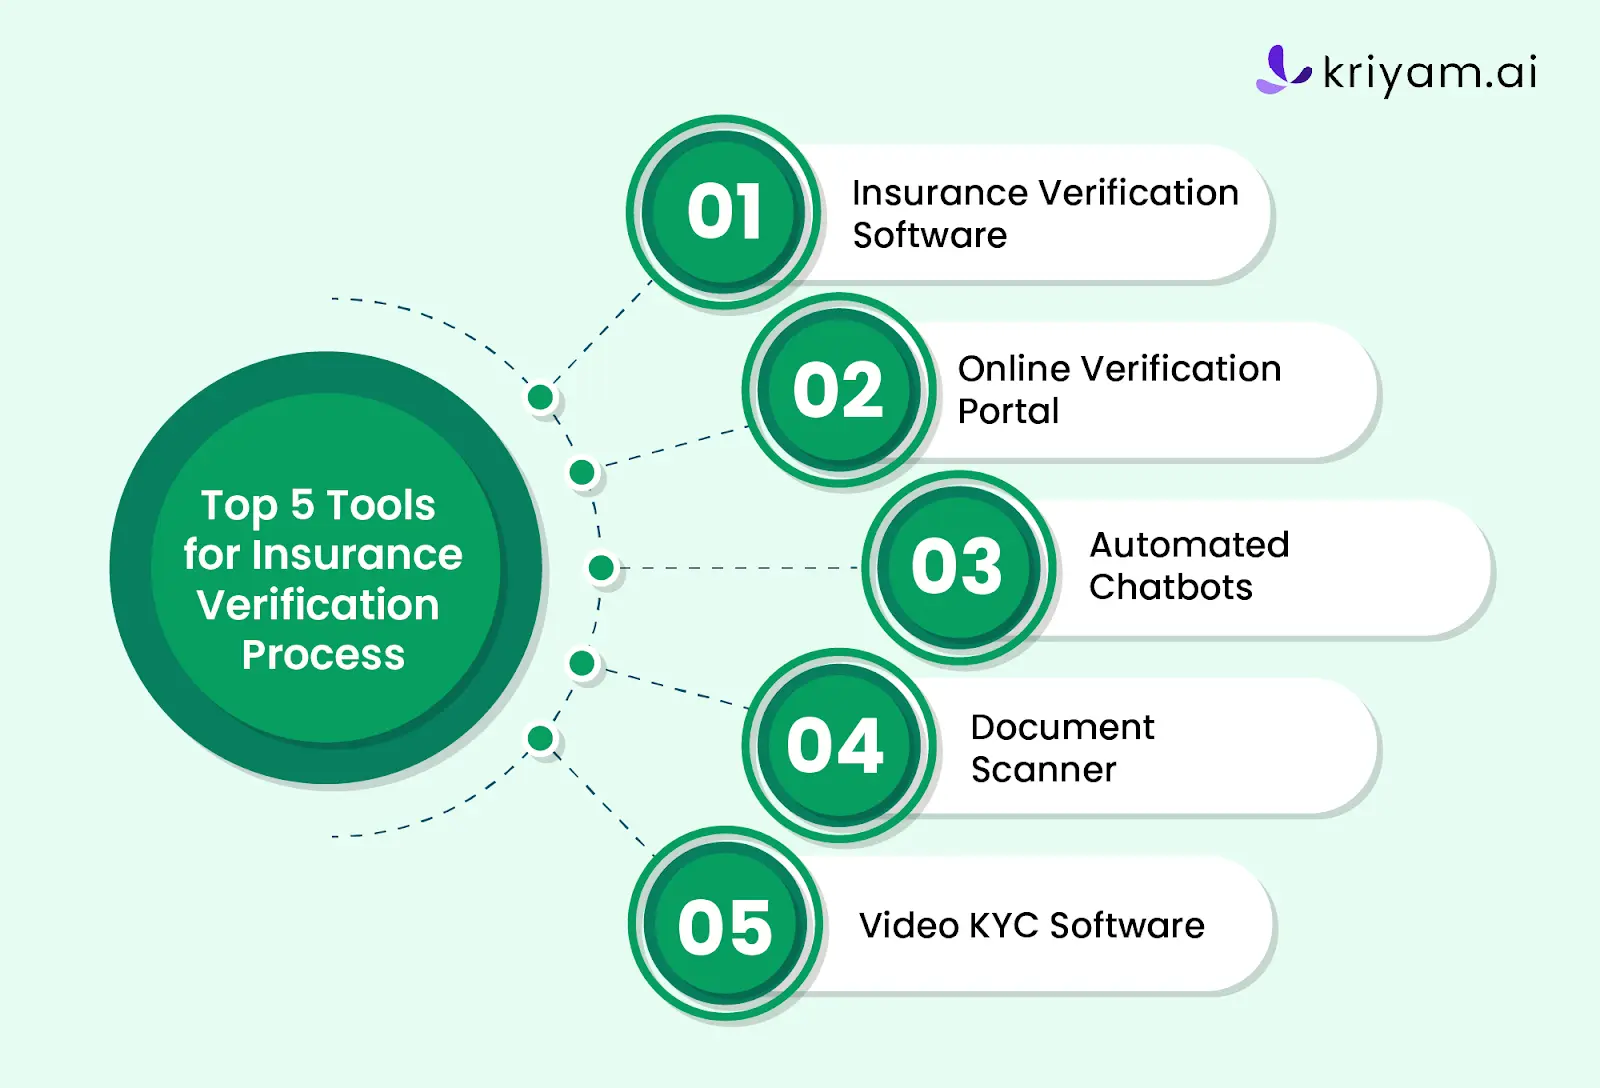 Top 5 Tools for Insurance Verification